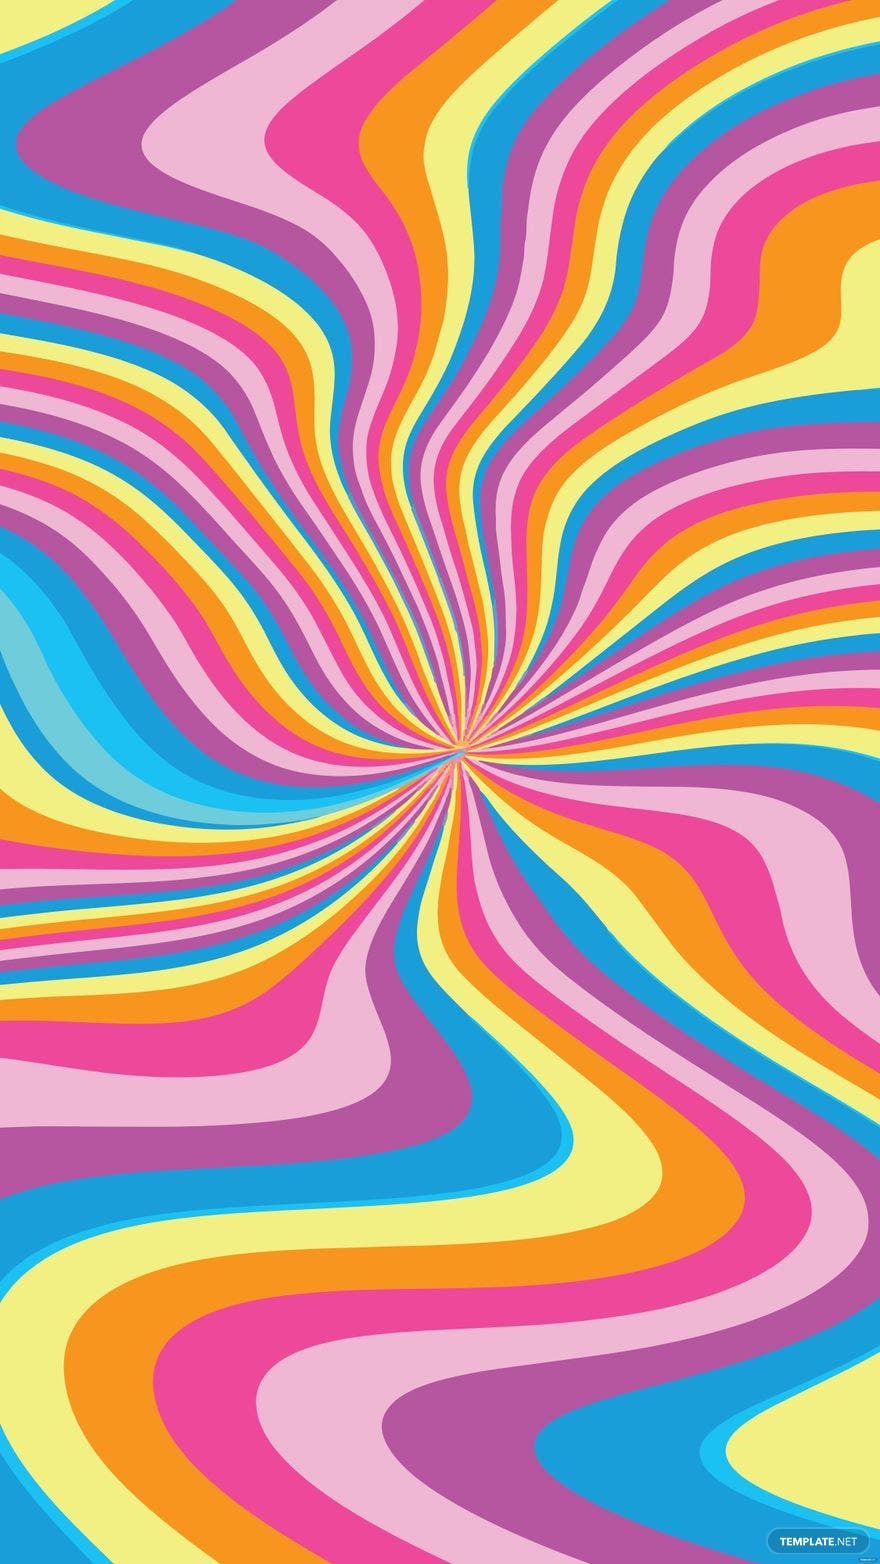 A colorful swirl background - Trippy